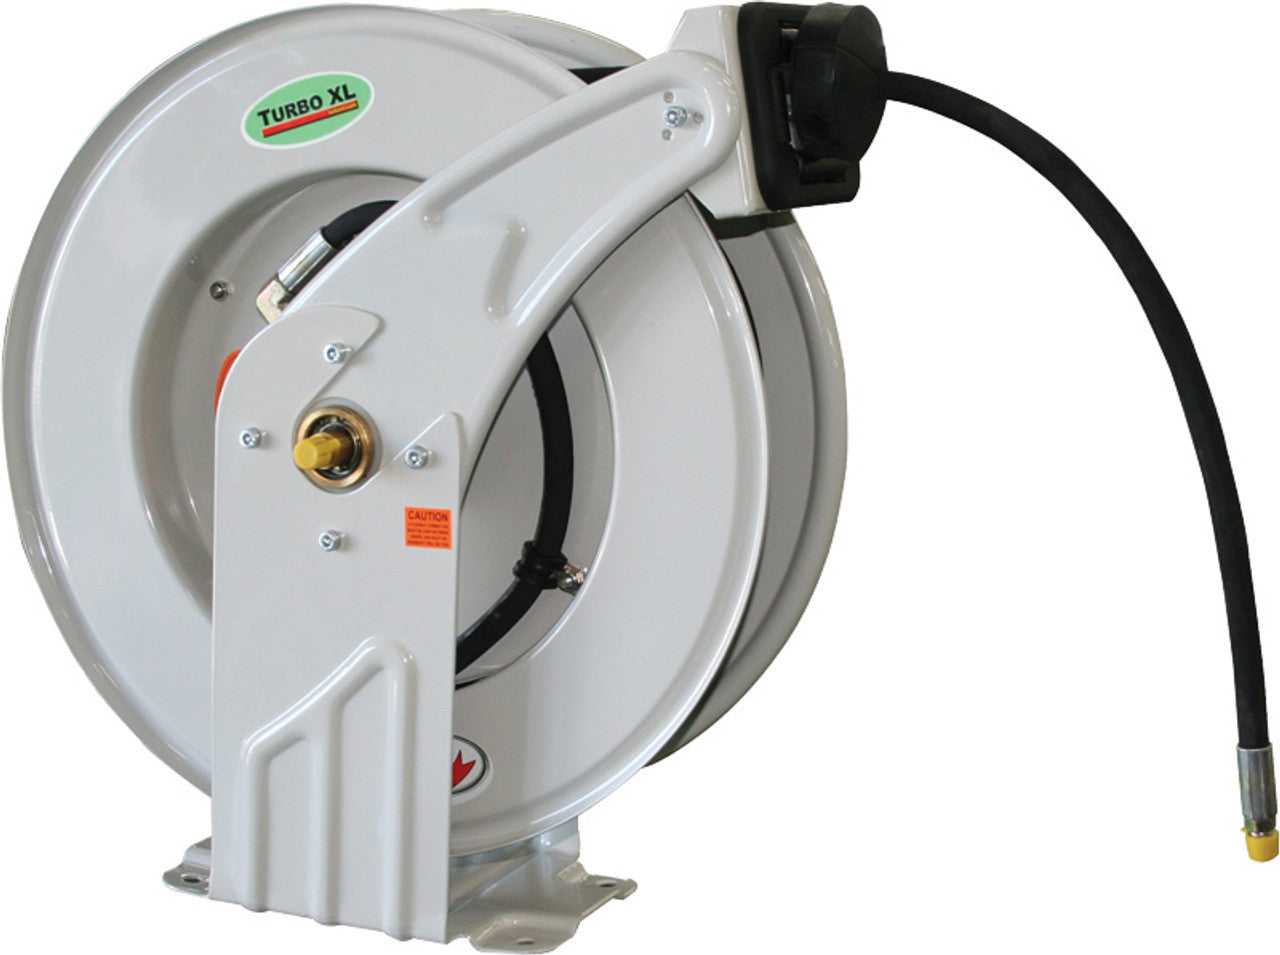 Turbo XL, Turbo XL H820102 High Pressure Hose Reel for Grease, 5000 PSI, 1/4" x 33 Ft